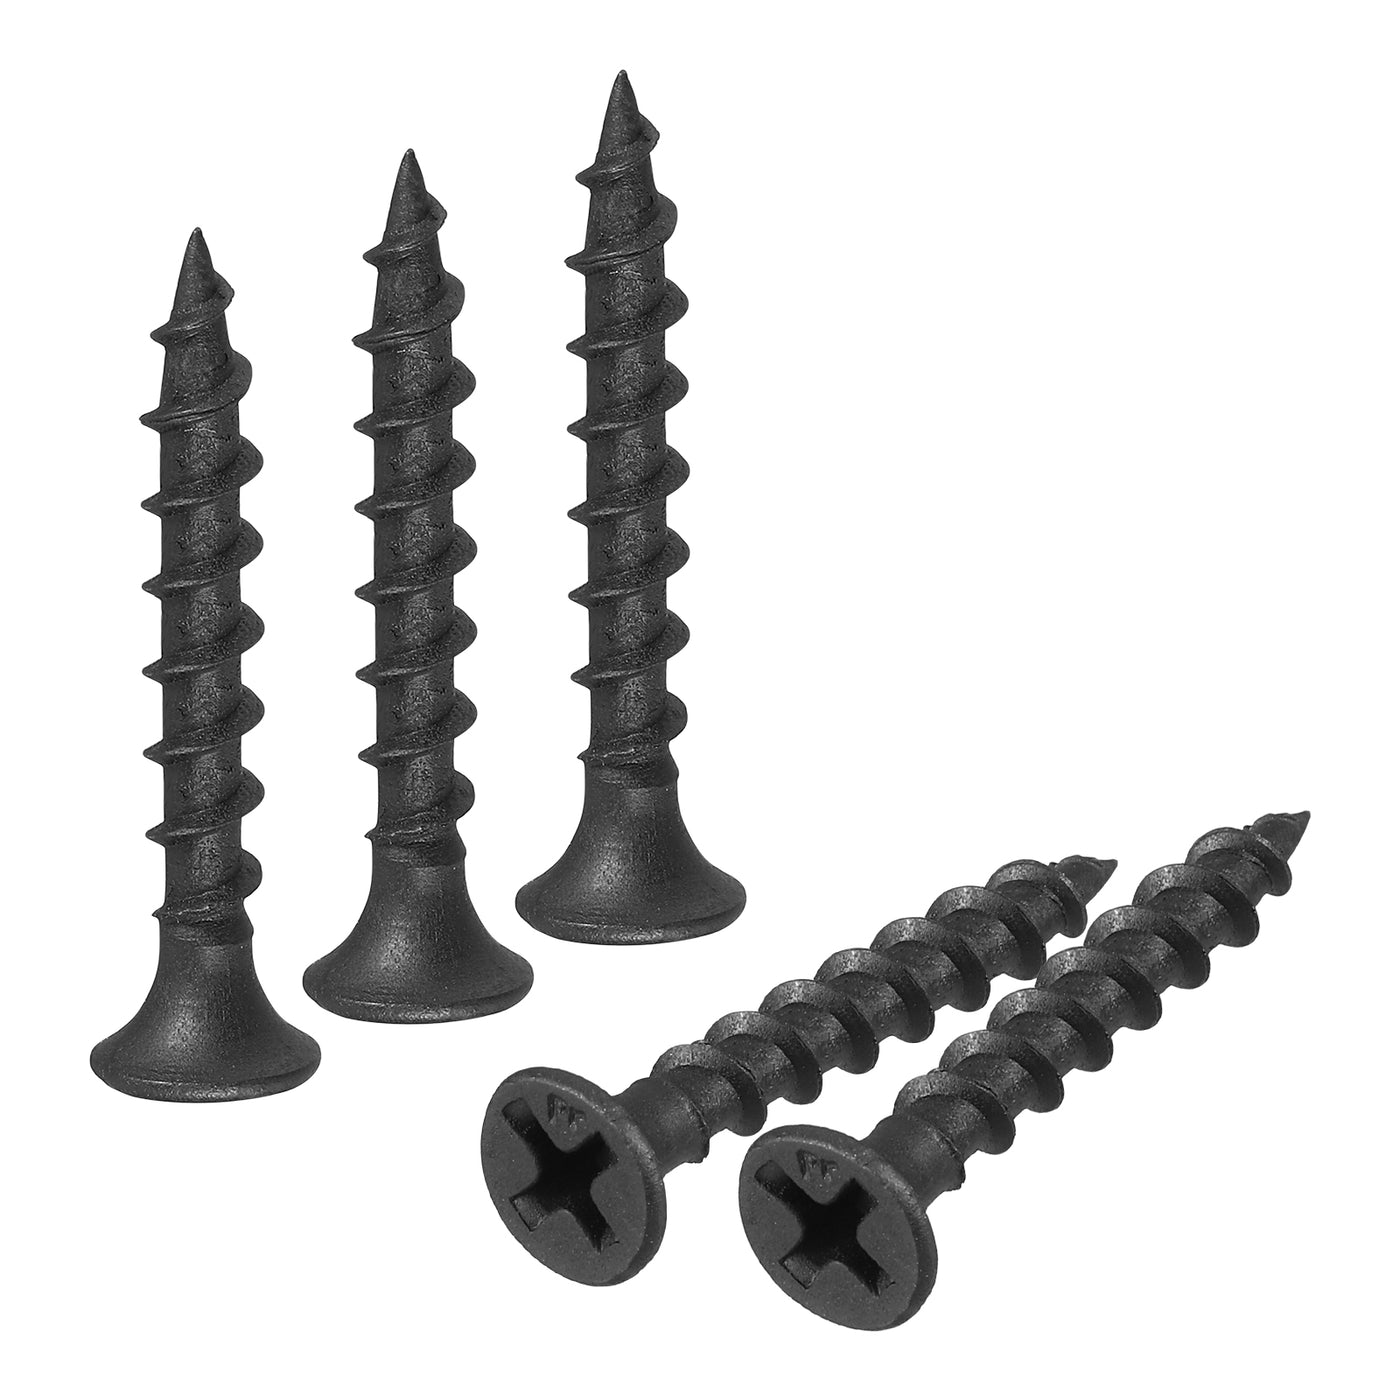 uxcell Uxcell M3.8x30mm 100pcs Phillips Drive Wood Screws, Carbon Steel Self Tapping Screws